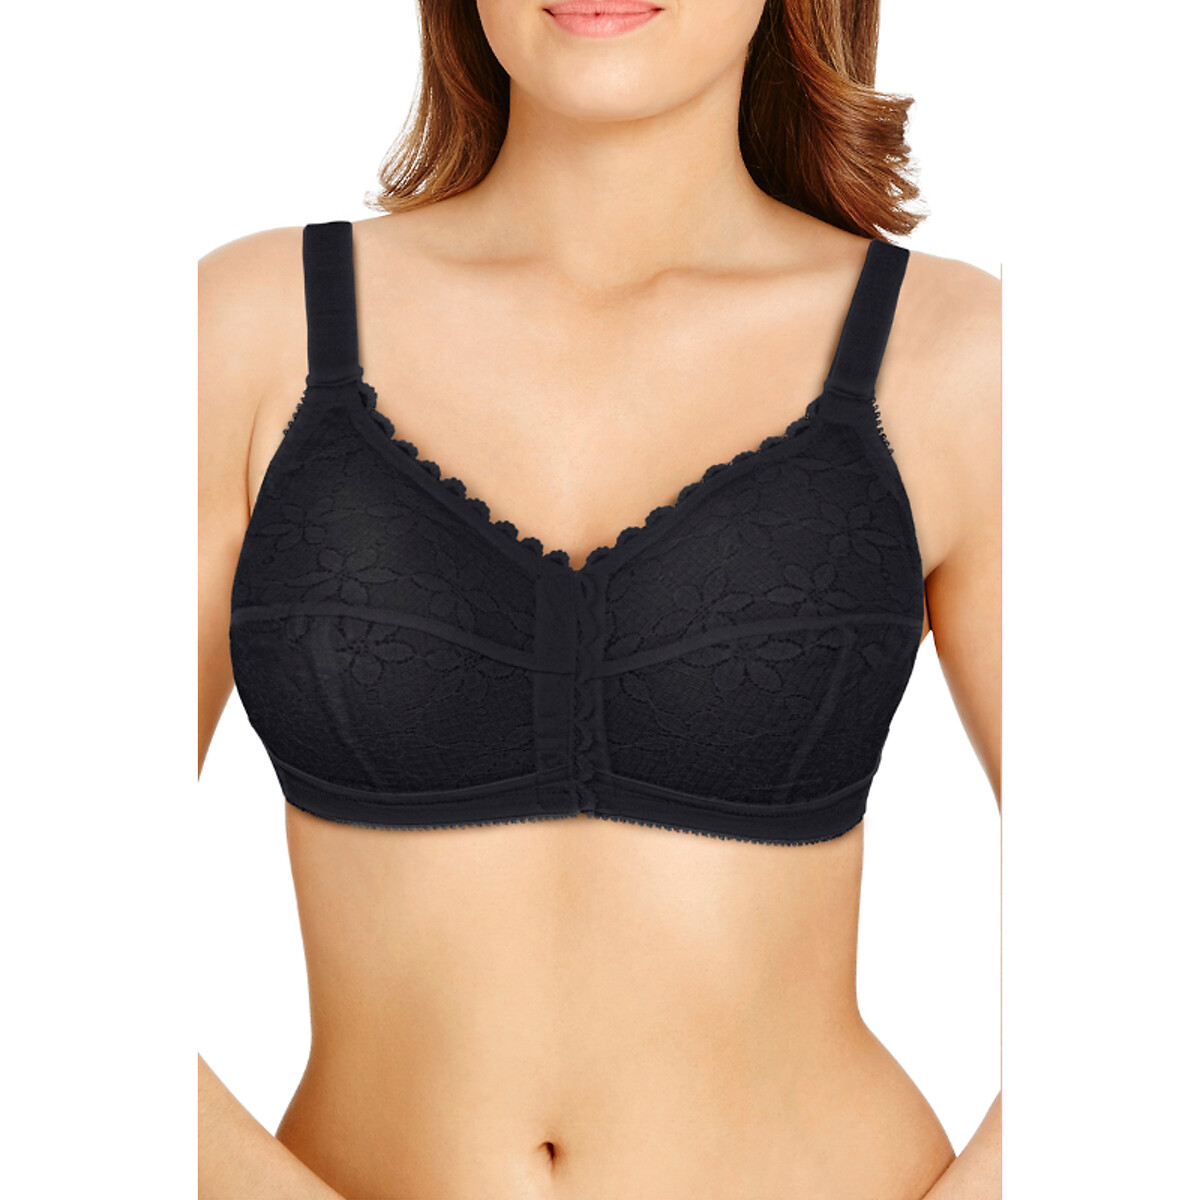 non-underwired bra with front fastening